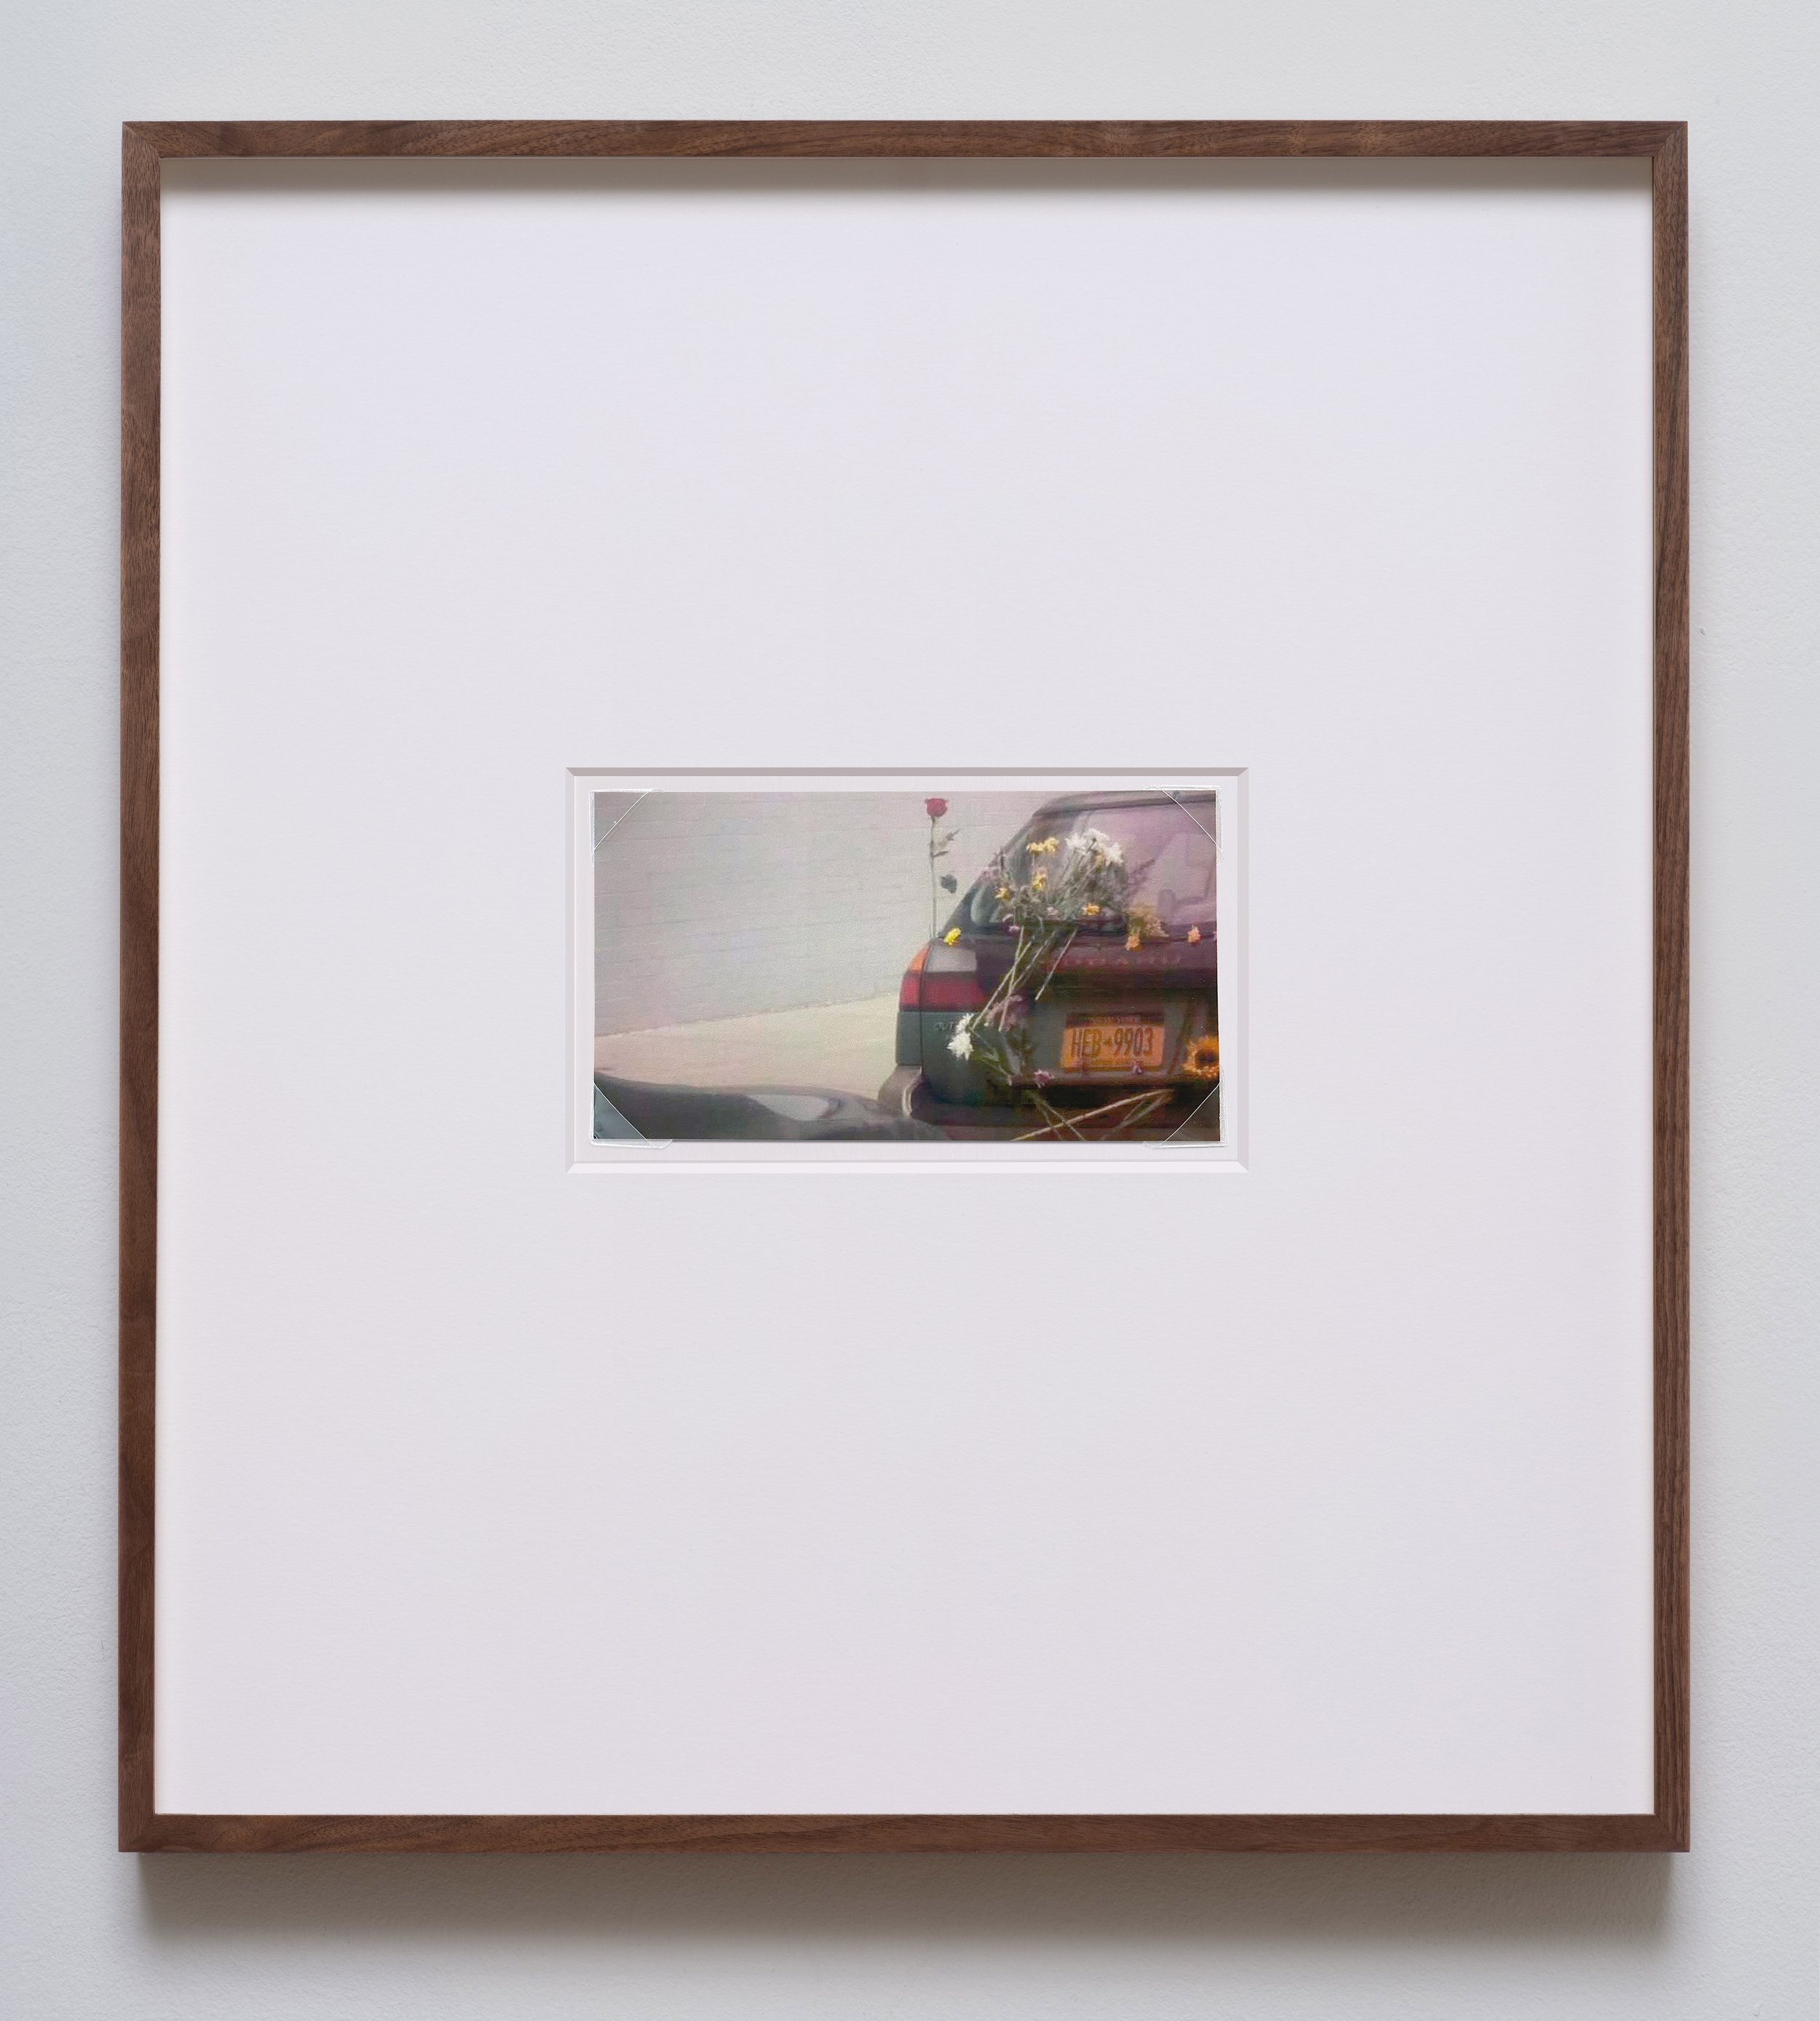   Rose  (from the series  Vehicle Sightings ), 2023  Archival pigment print 14 7/8x 13 3/8 x 1 1/2 inches; 37.8 x 31.4 x 3.8 cm (framed)  3 x 5 1/4 inches; 7.6 x 13.4 cm (image)&nbsp; 